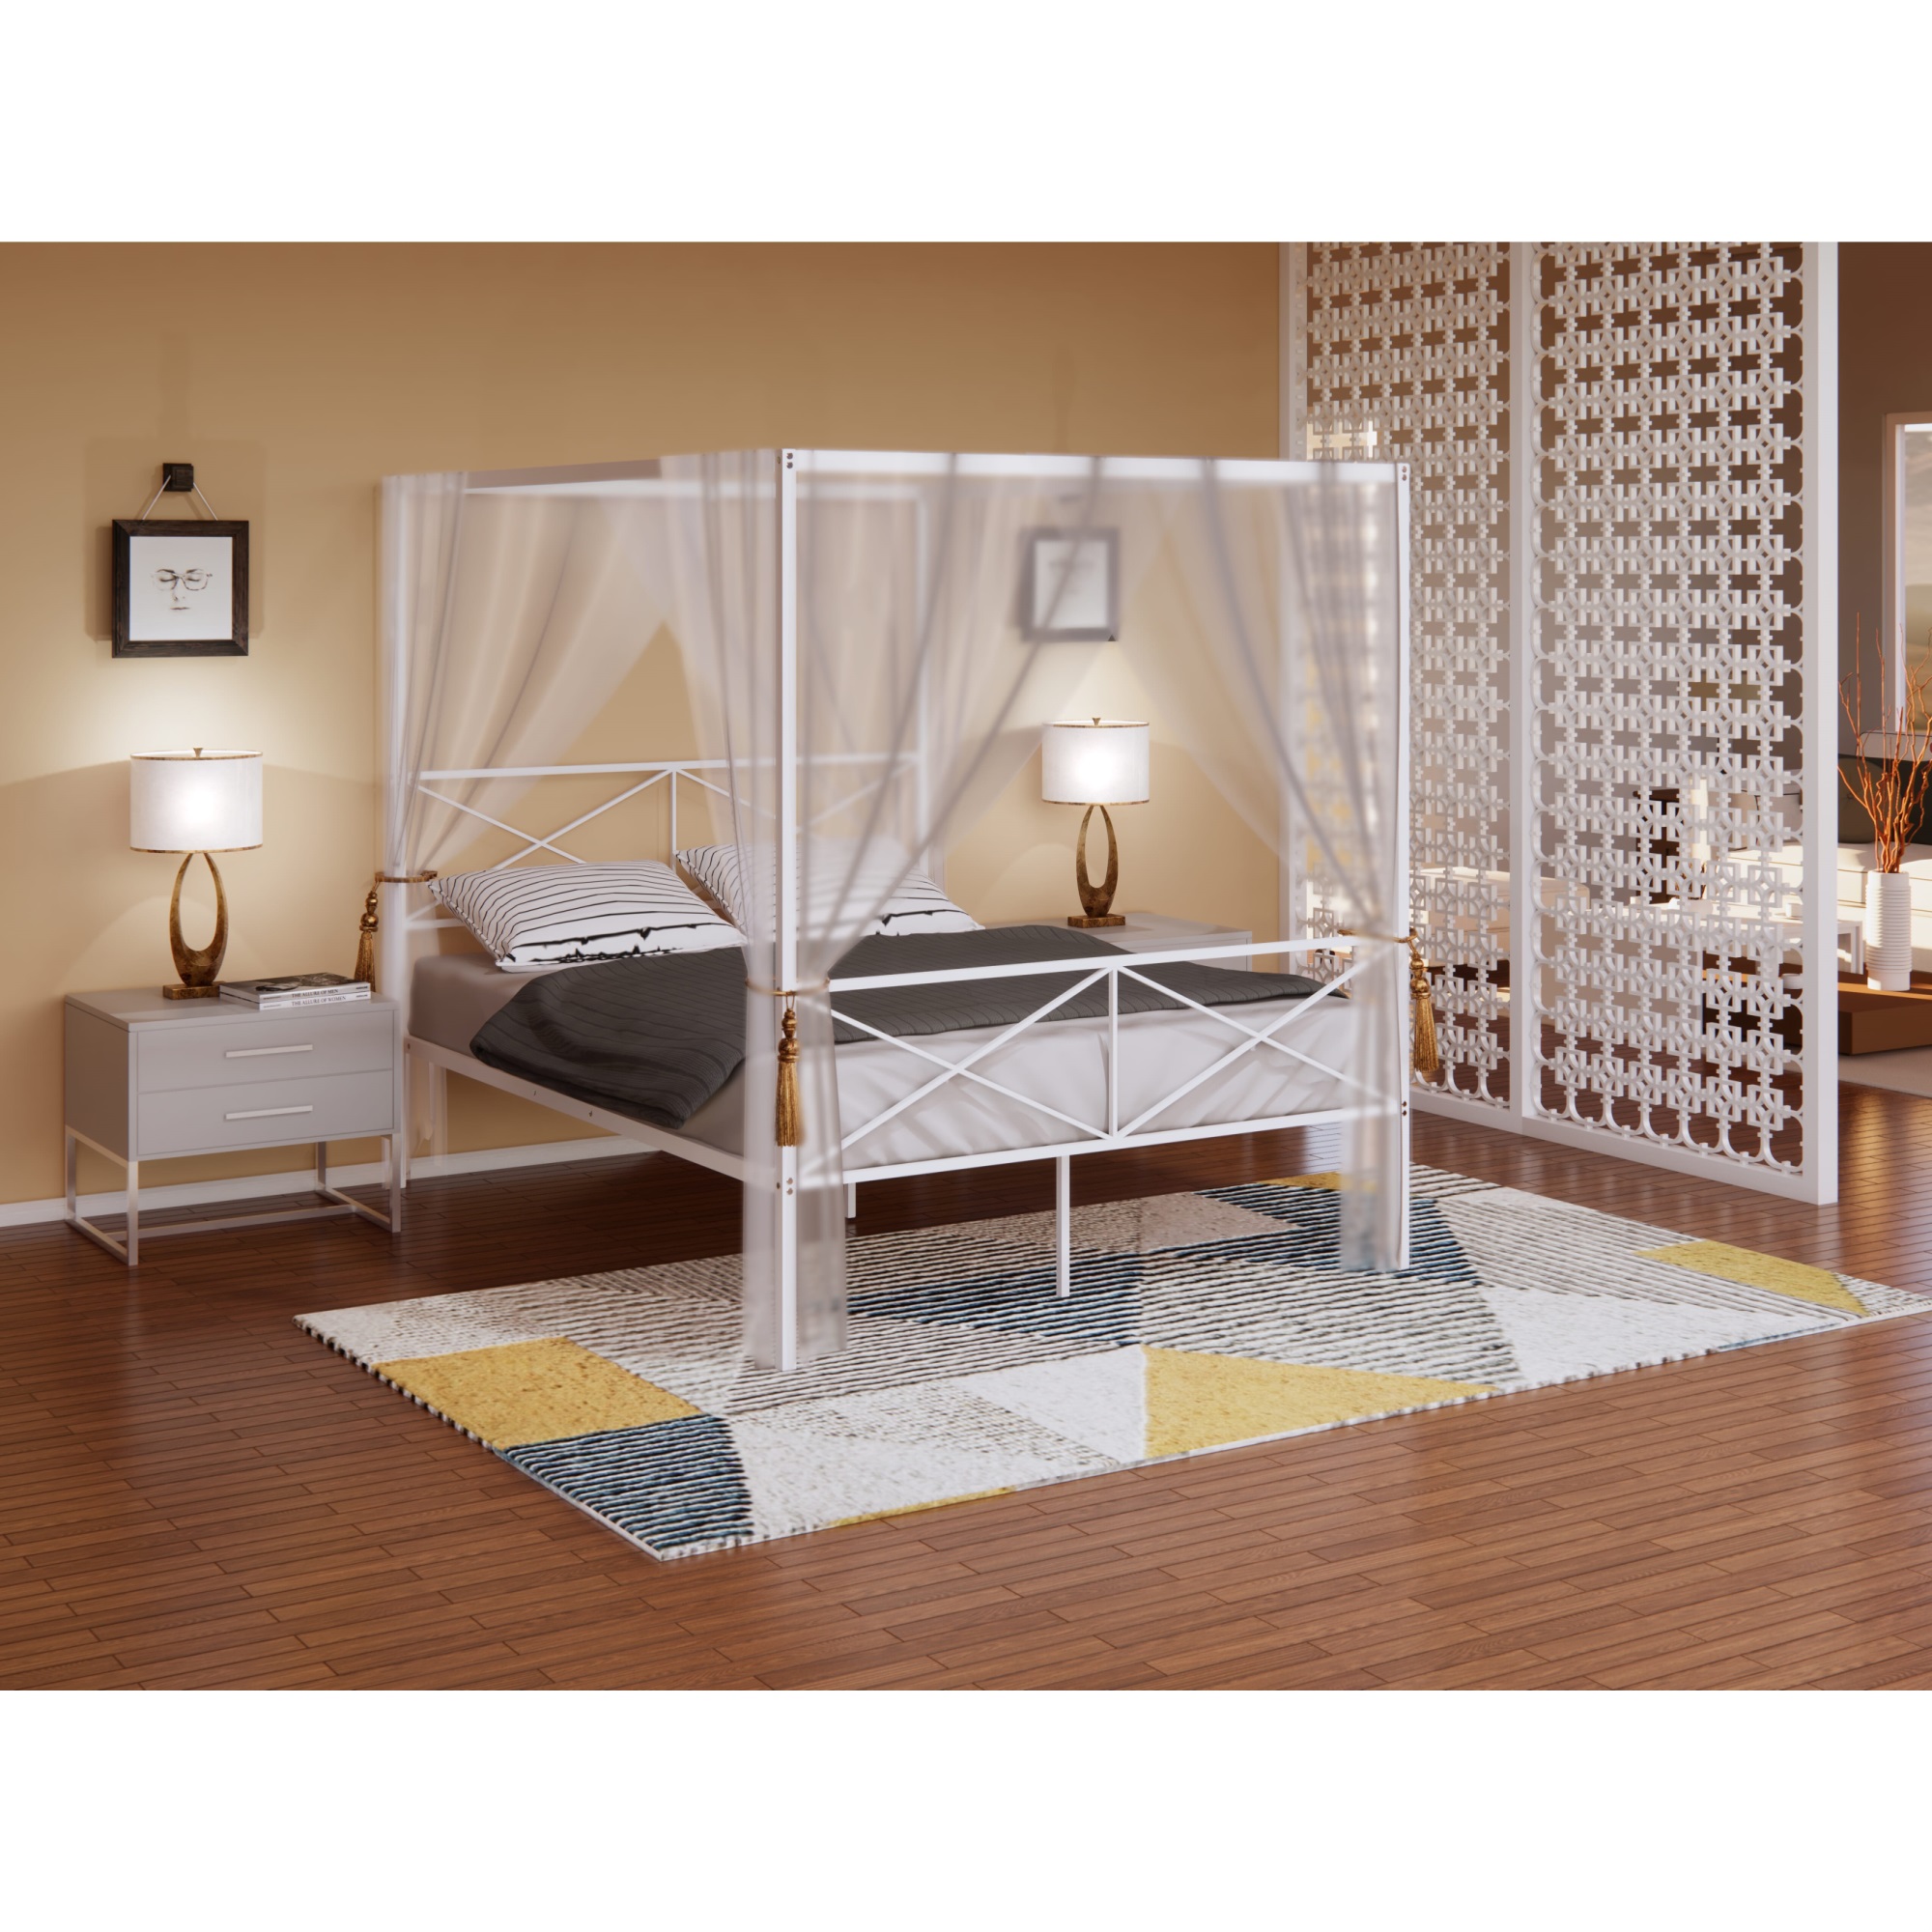 East West Furniture - GEQCWHI - Glendale Queen Size Bed Frame with Modern Designed Headboard and Footboard - Canopy Metal Frame in Powder Coating W